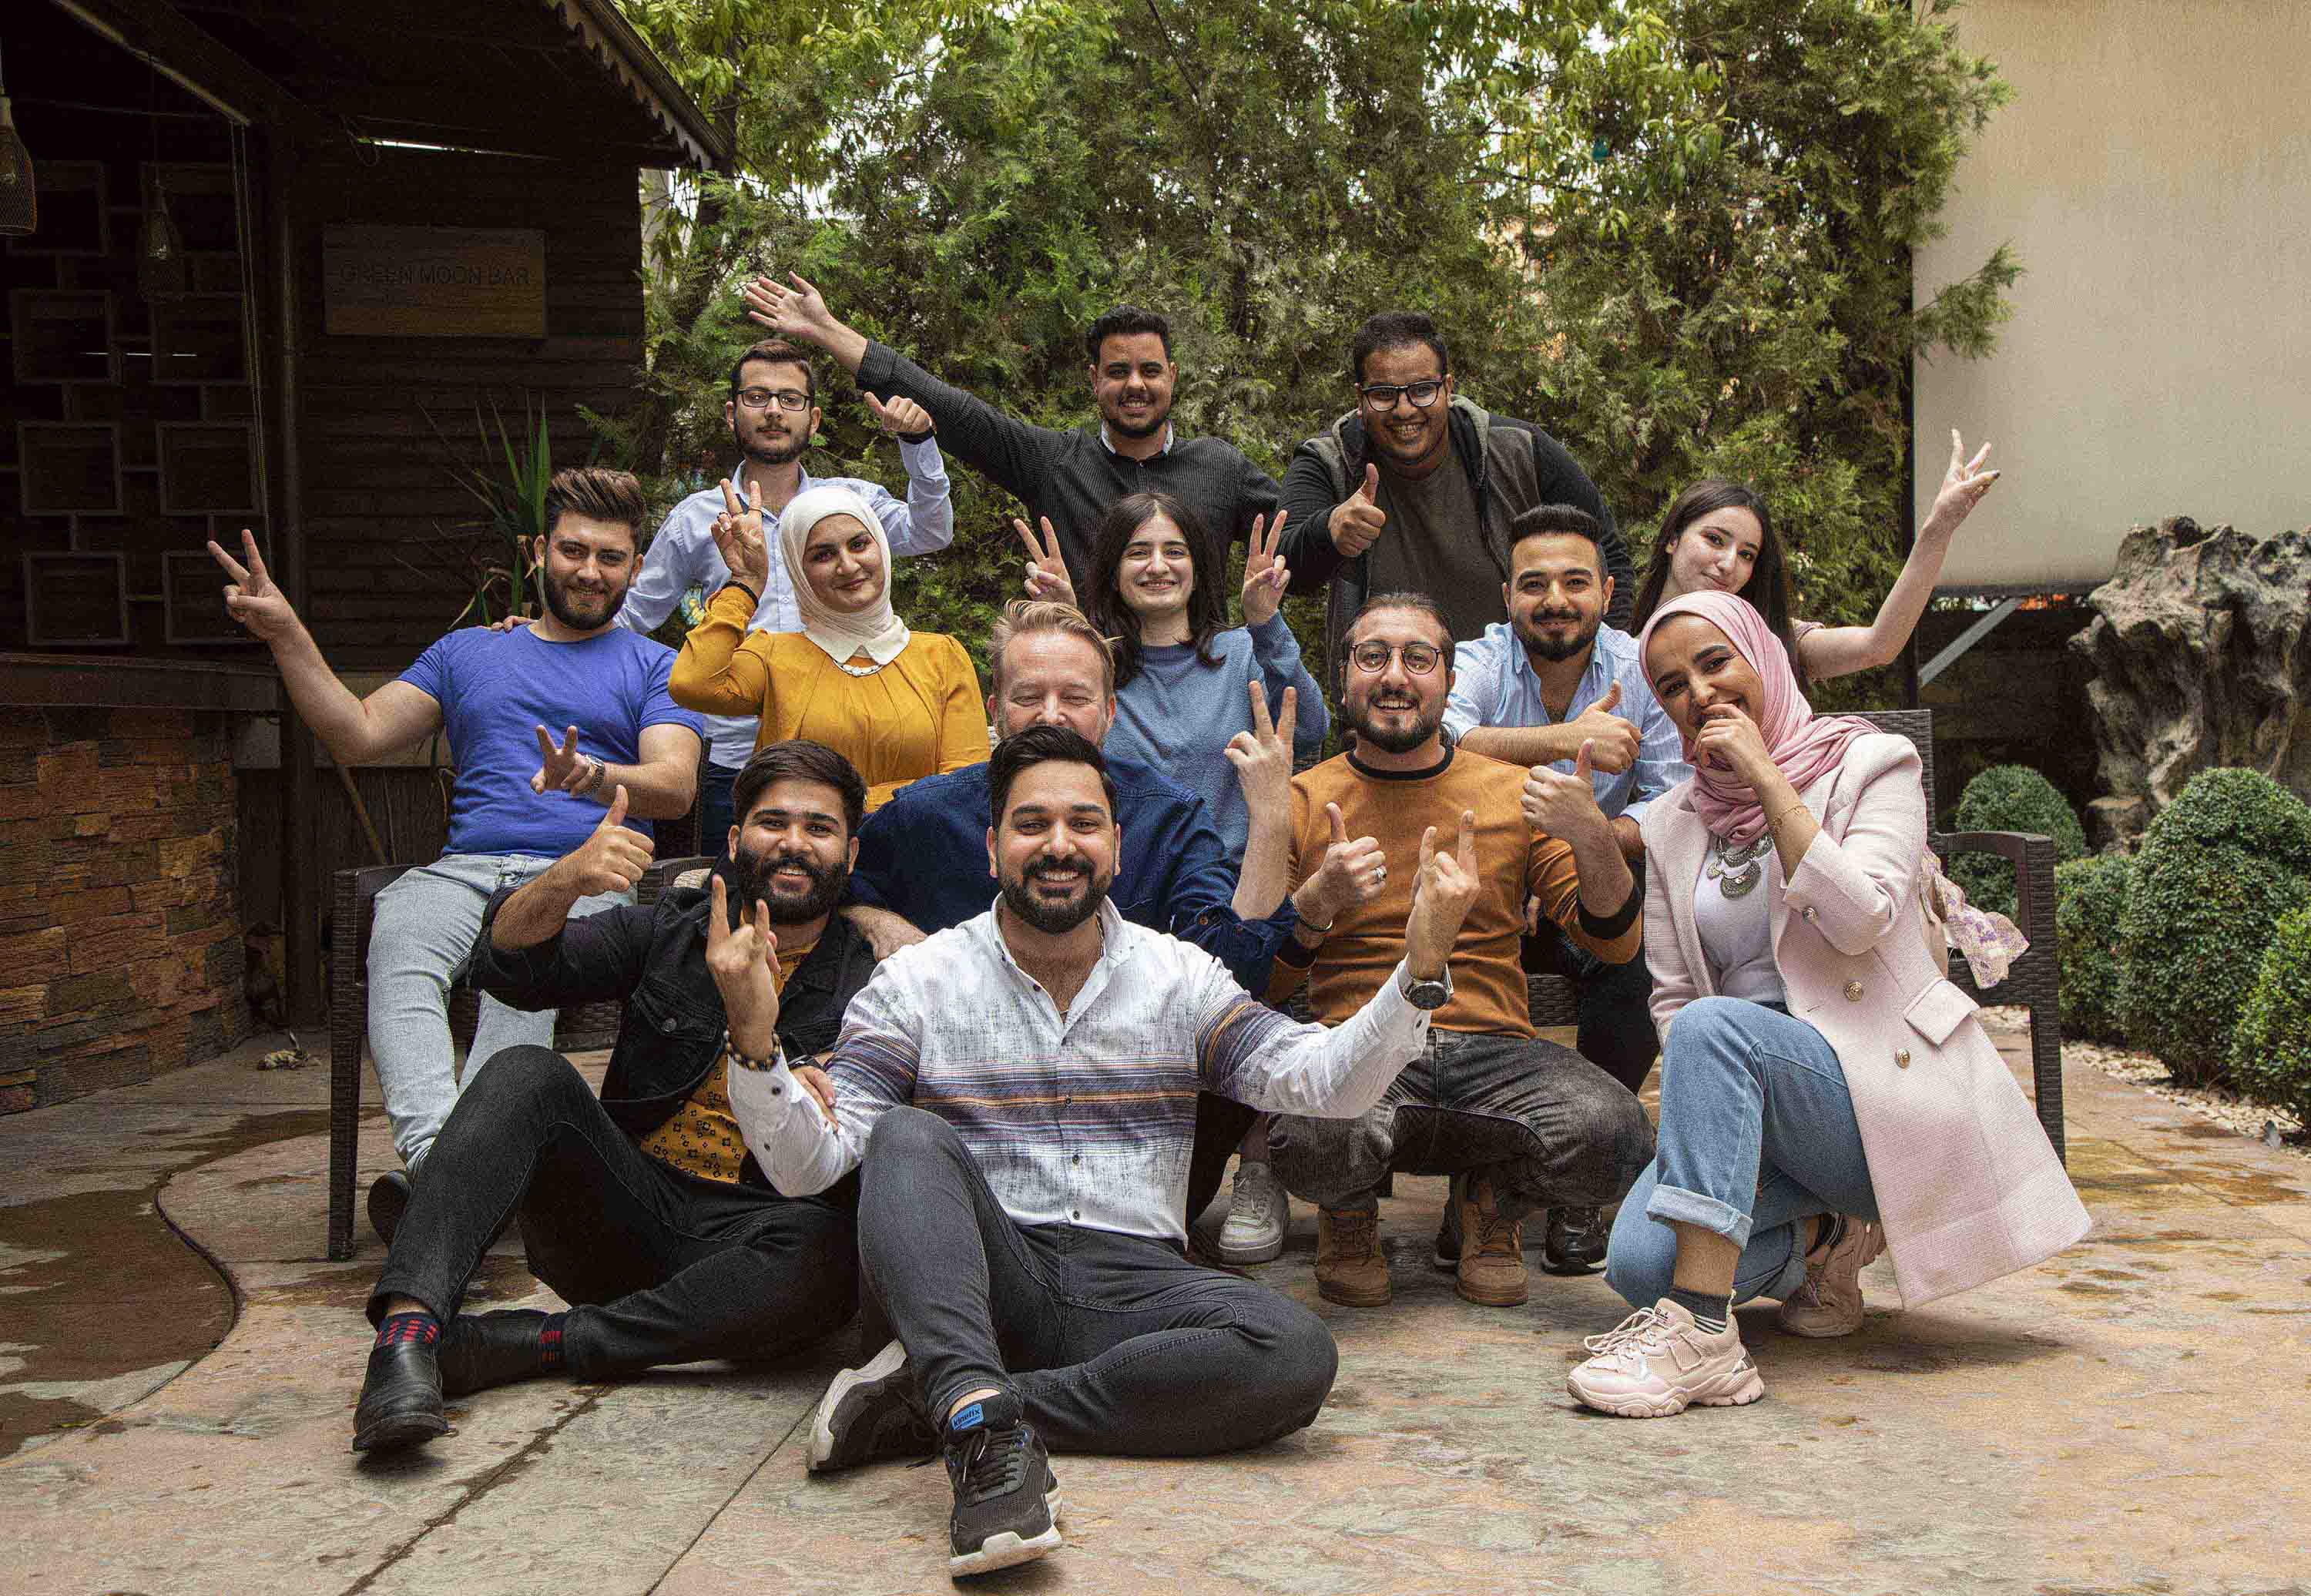 During the Salam project, young people have an opportunity meet other young people from different backgrounds, religious groups and cities in Iraq. Young people share the desire to build peace and a better society. Image: Tech4Peace